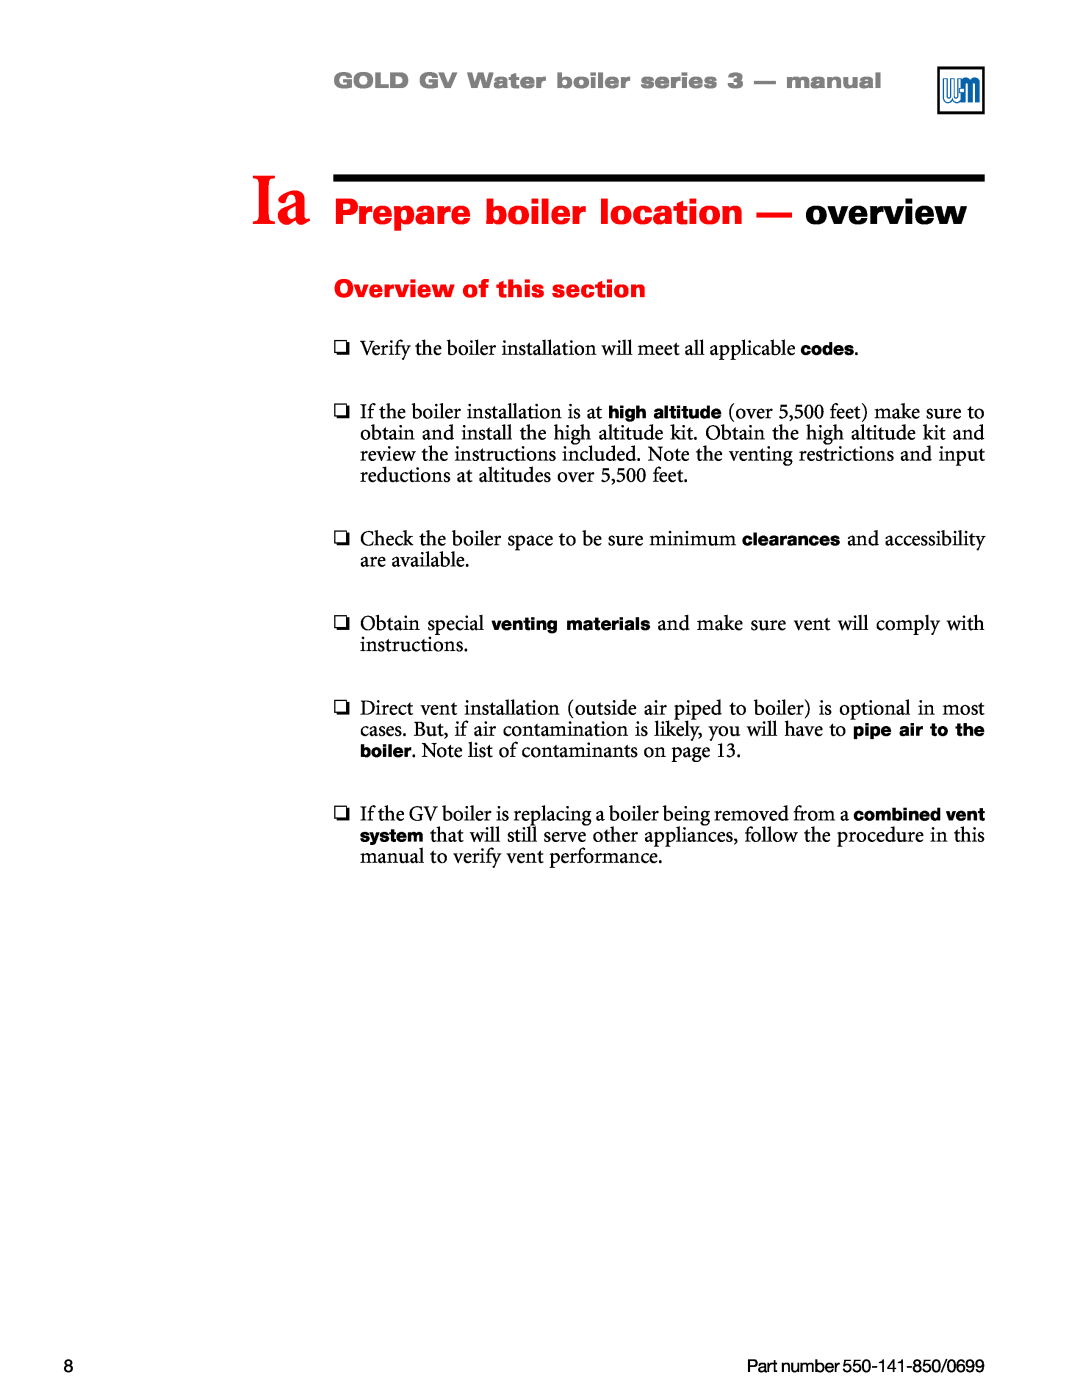 Weil-McLain GOLD DV WATER BOILER, 550-141-850/0599 manual Ia Prepare boiler location — overview, Overview of this section 